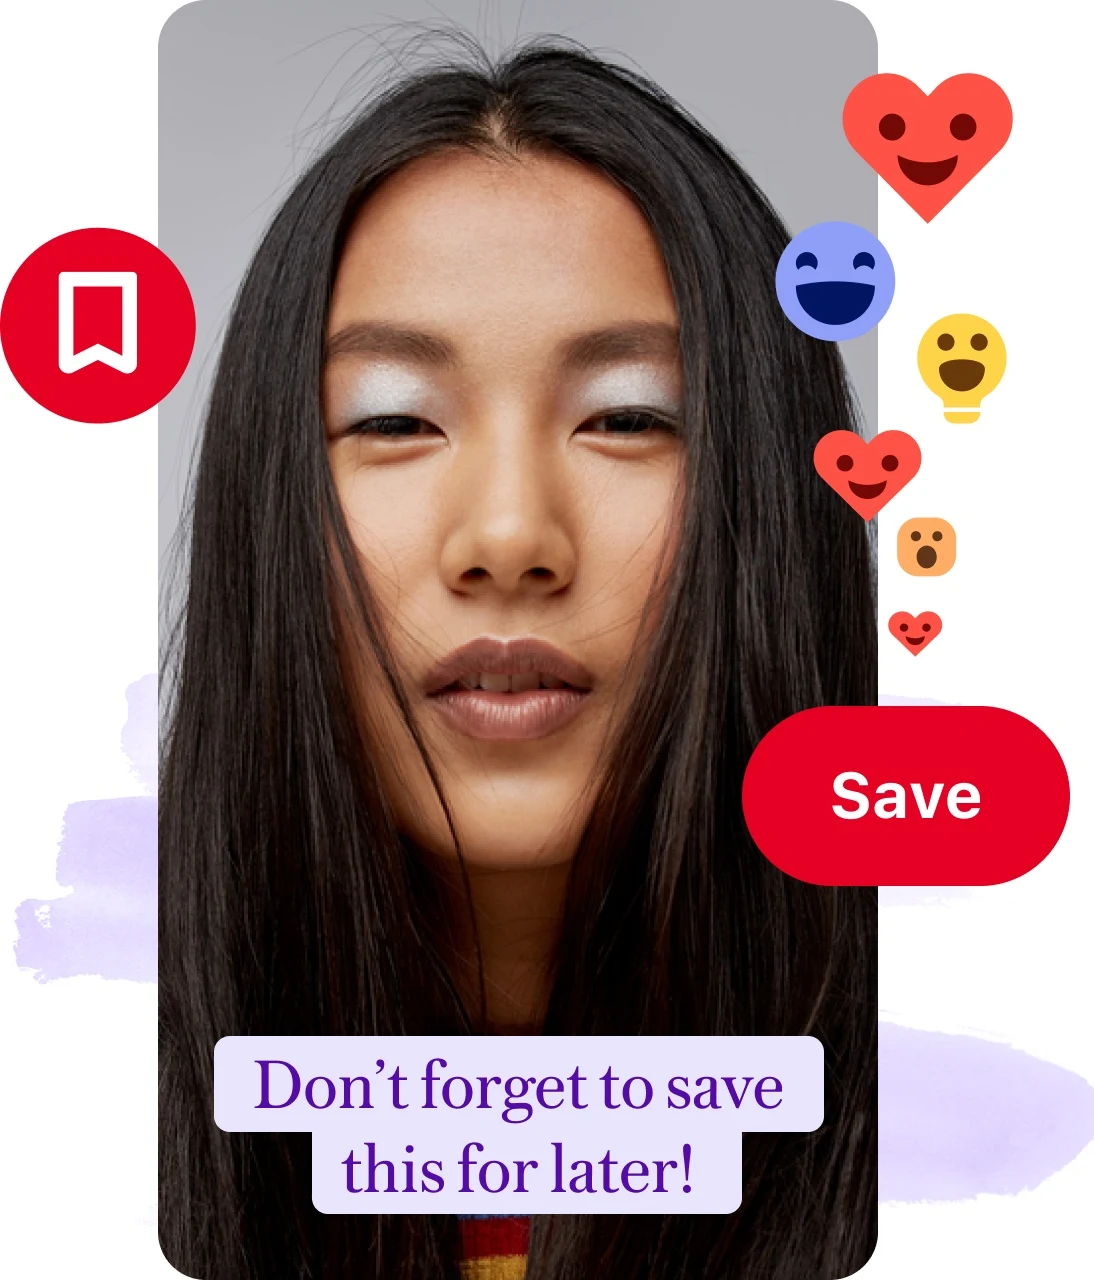 Collage of pin of woman's face with with reminder to save label, save buttons and emoji reactions